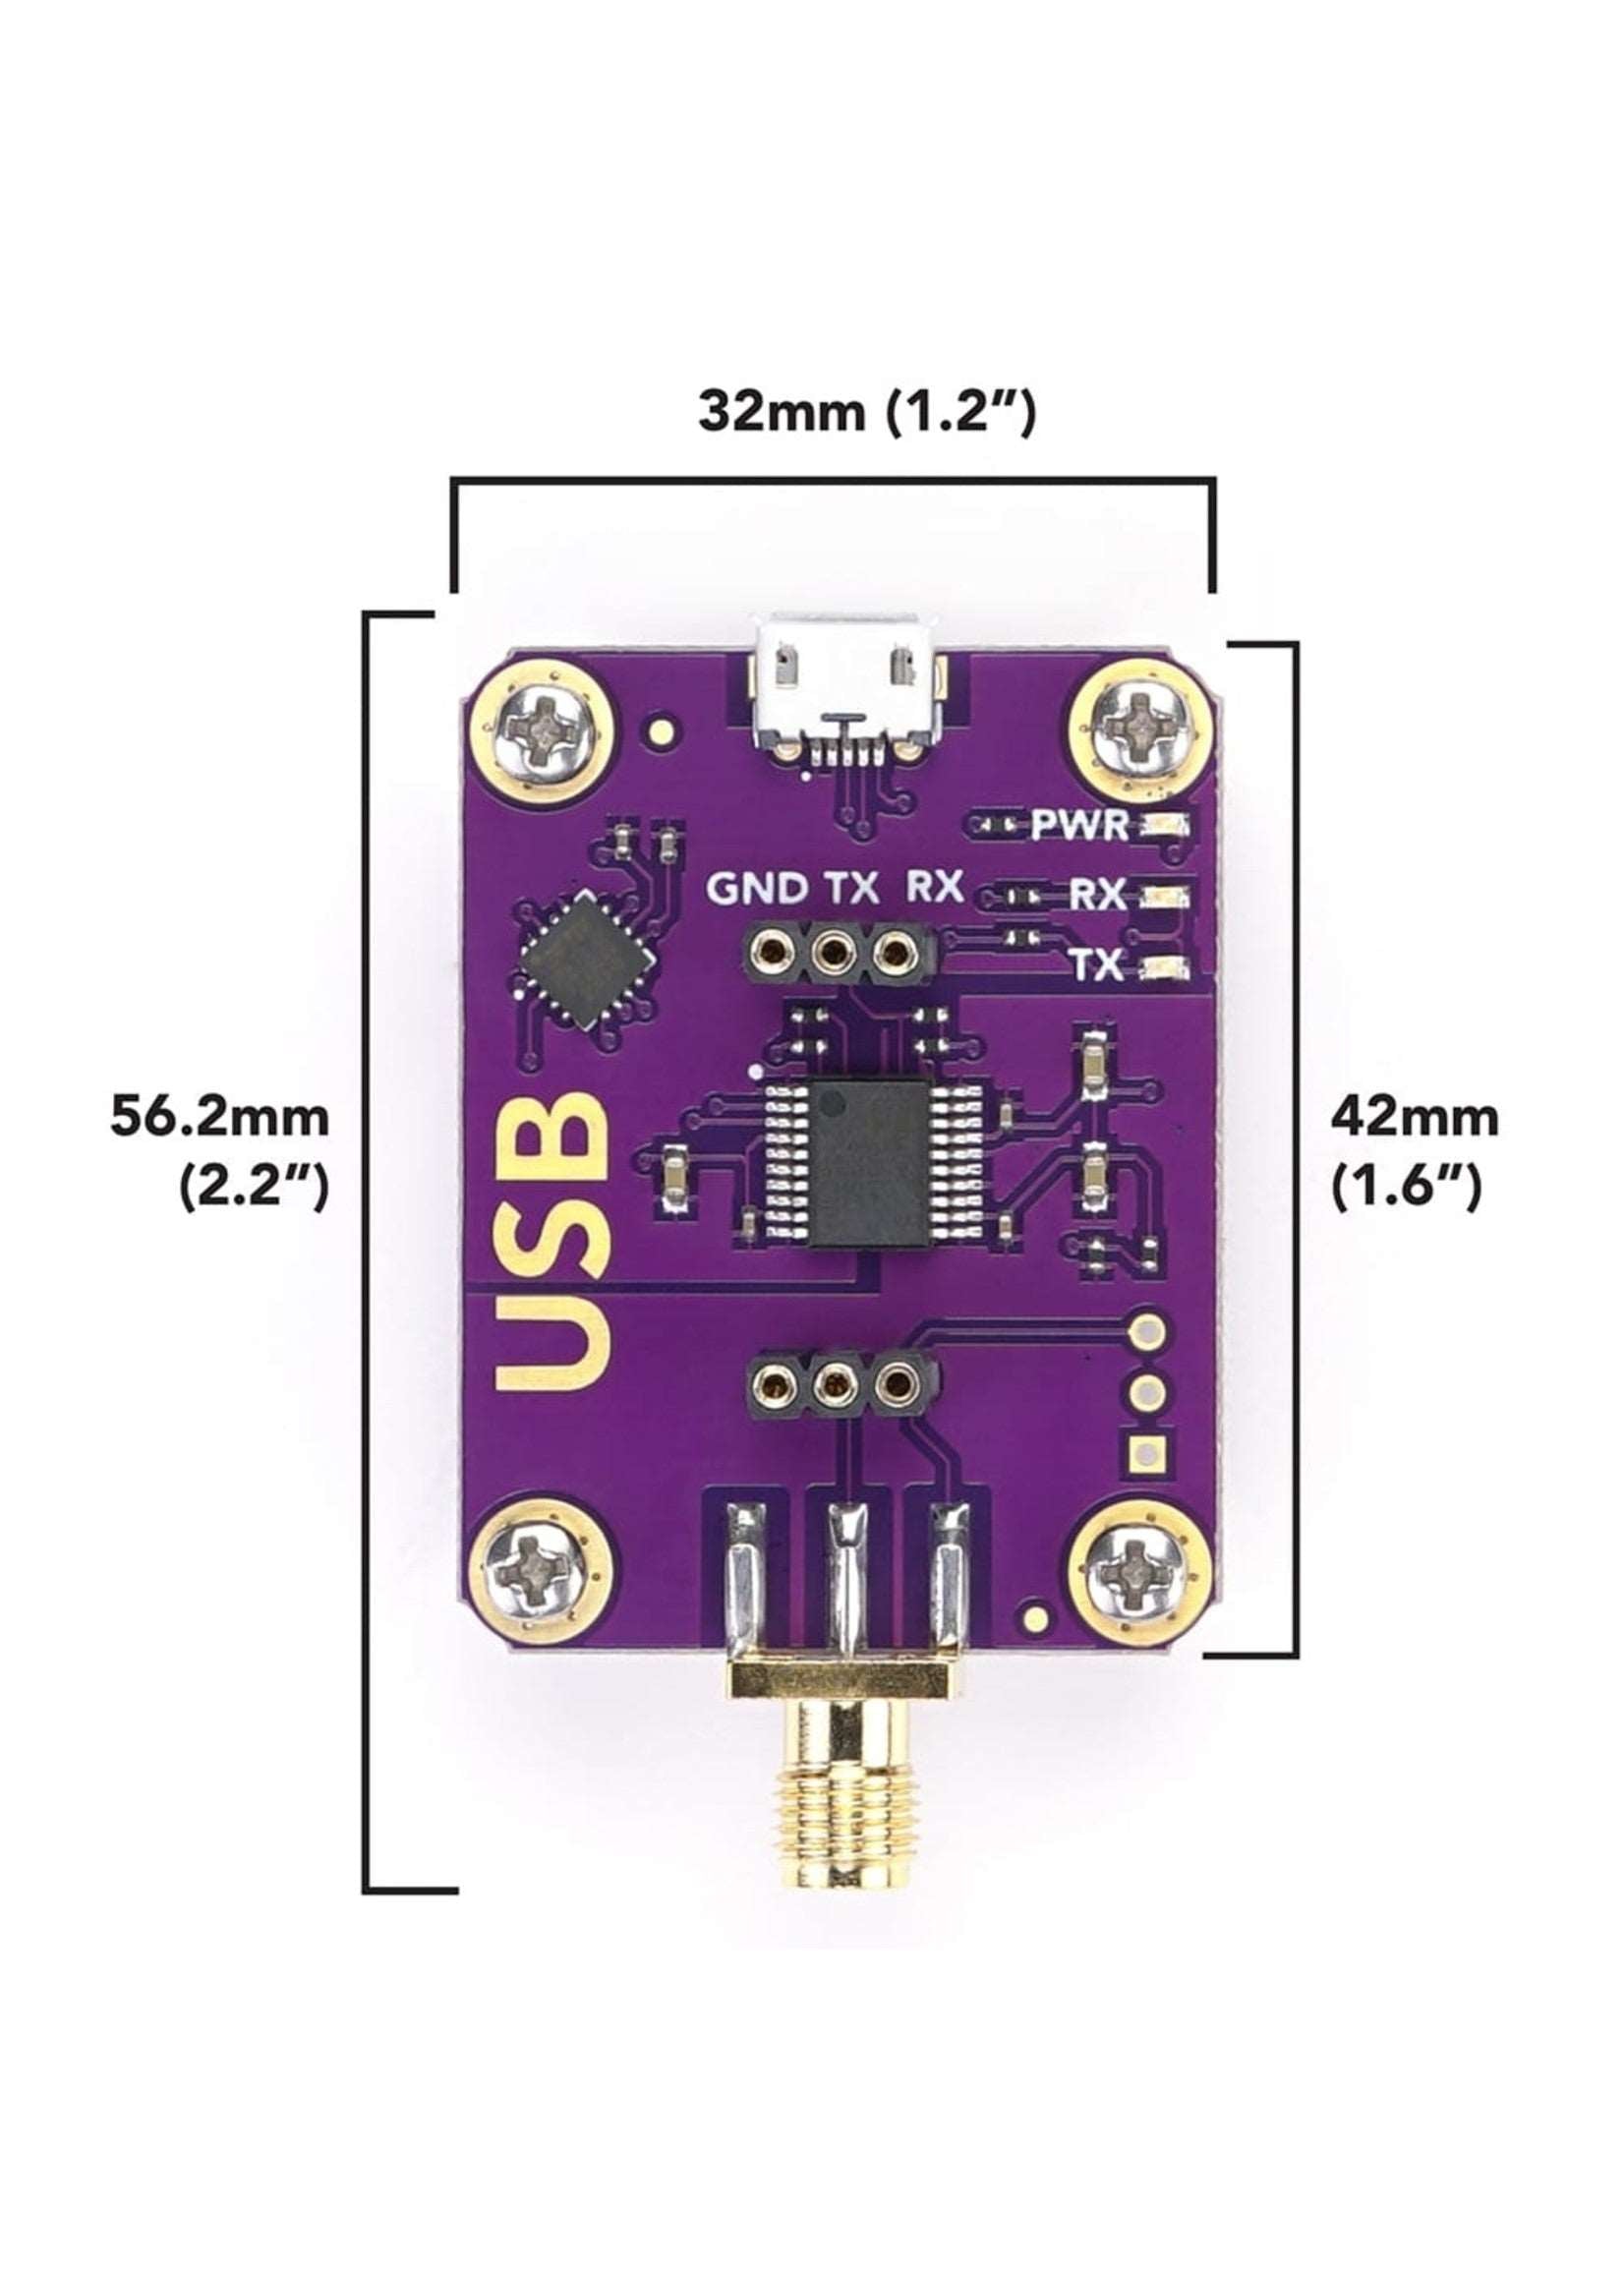 Gen 2 Electrically Isolated USB EZO™ Carrier Board